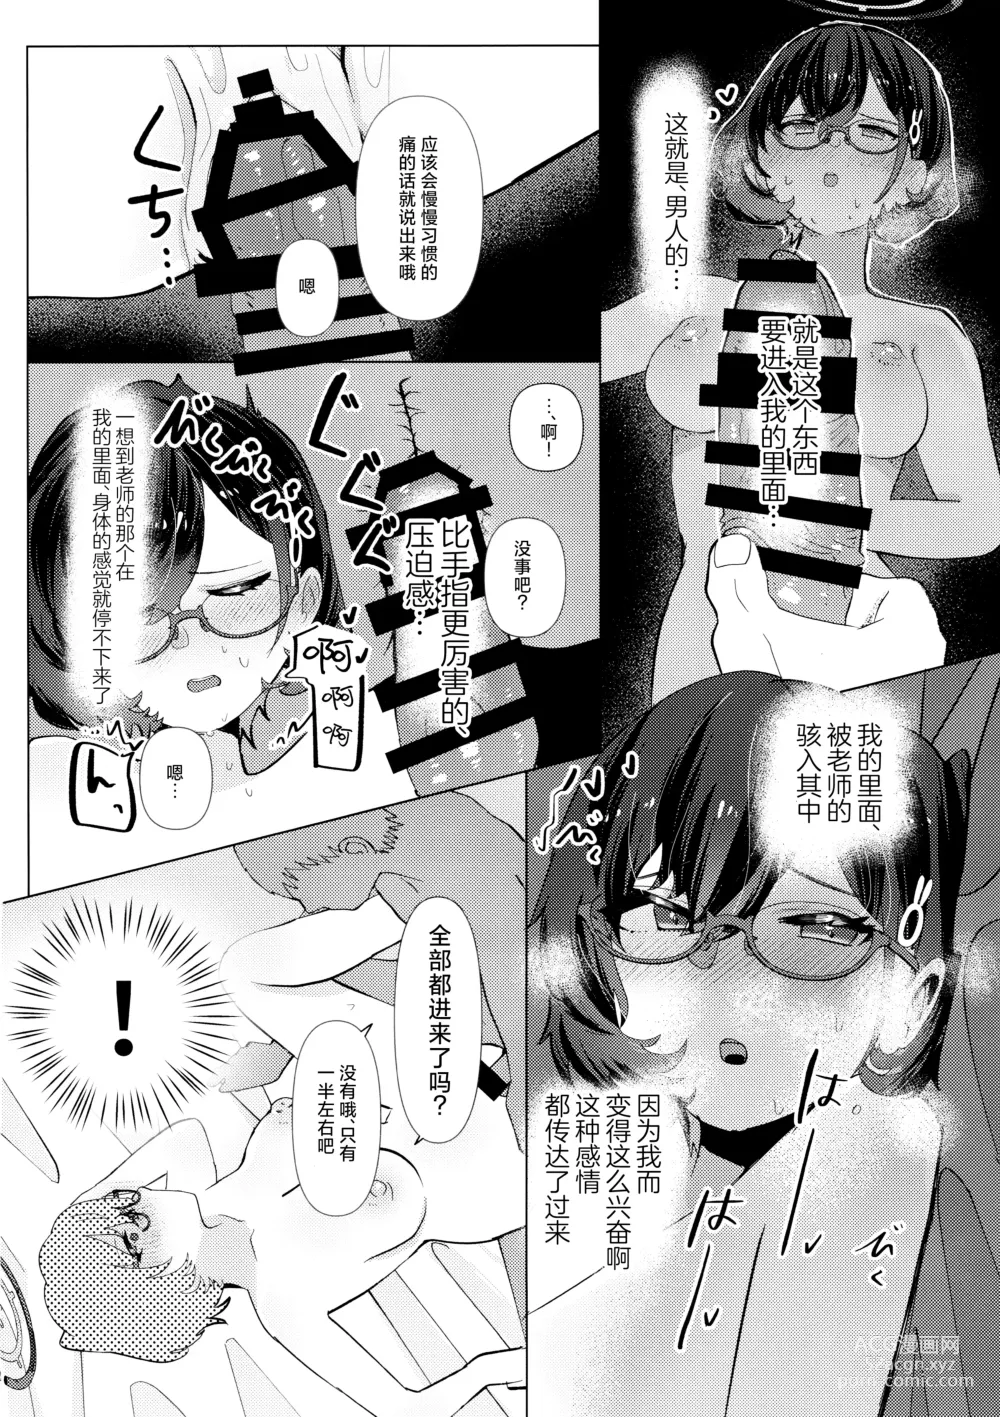 Page 17 of doujinshi 第一次的教学